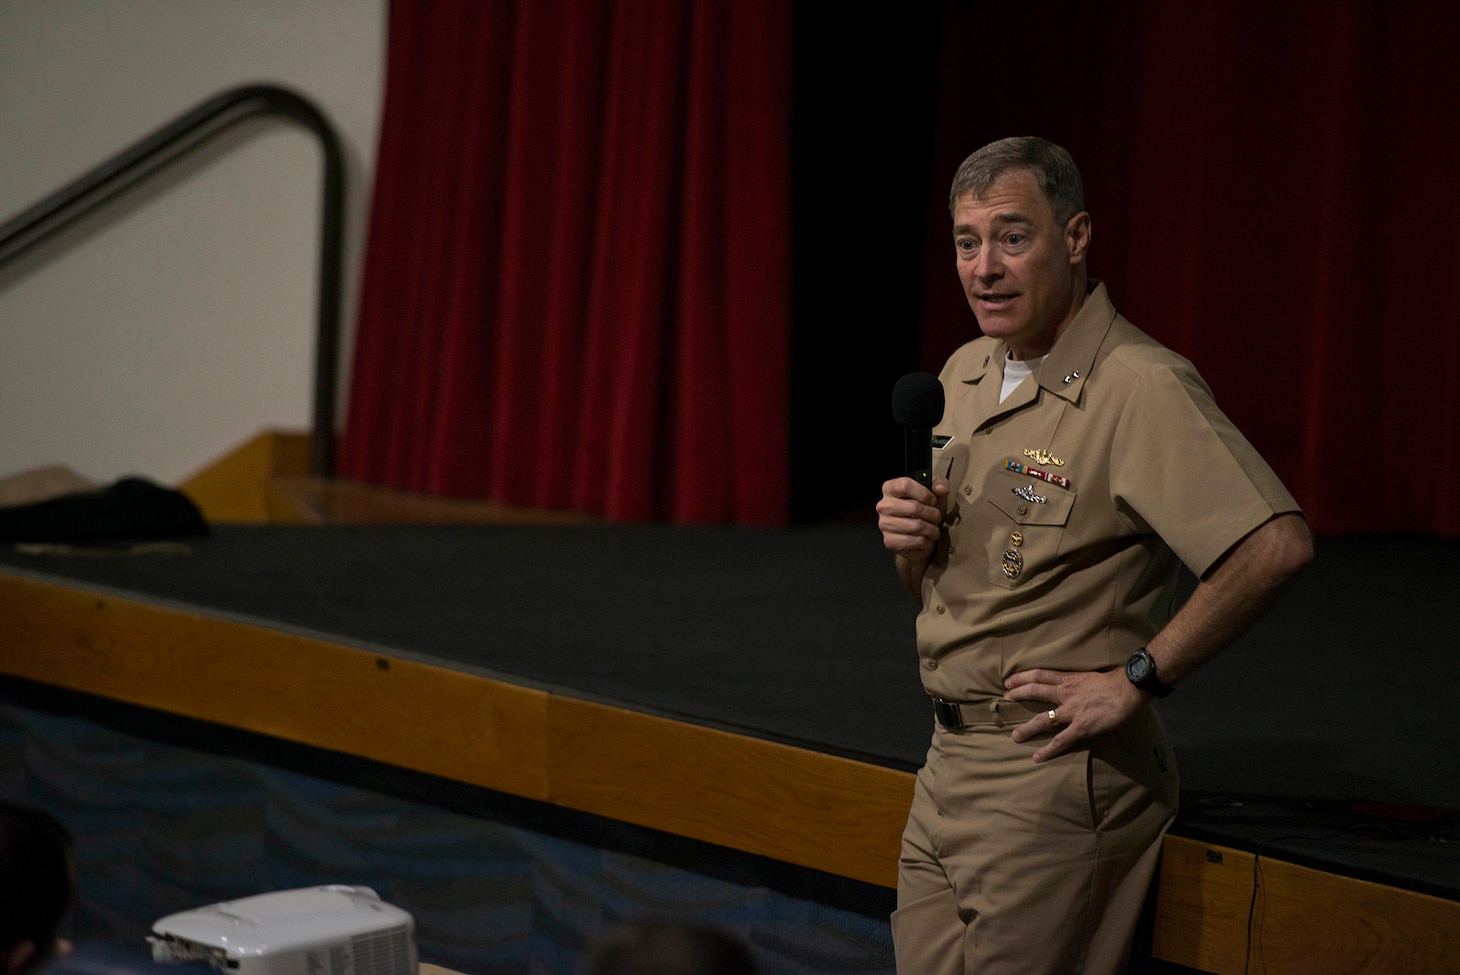 BANGOR, Wash. (Feb. 23, 2016) - Rear Adm. Frederick J. Roegge, commander, Submarine Force U.S. Pacific Fleet, speaks to Sailors about the submarine force Commander's Intent during an all-hands call at Naval Base Kitsap-Bangor. During his two-day visit to the Pacific Northwest, Roegge spent time visiting Sailors on submarines in both the shipyard and on the waterfront. (U.S. Navy photo by Mass Communication Specialist 2nd Class Amanda Gray/Released)